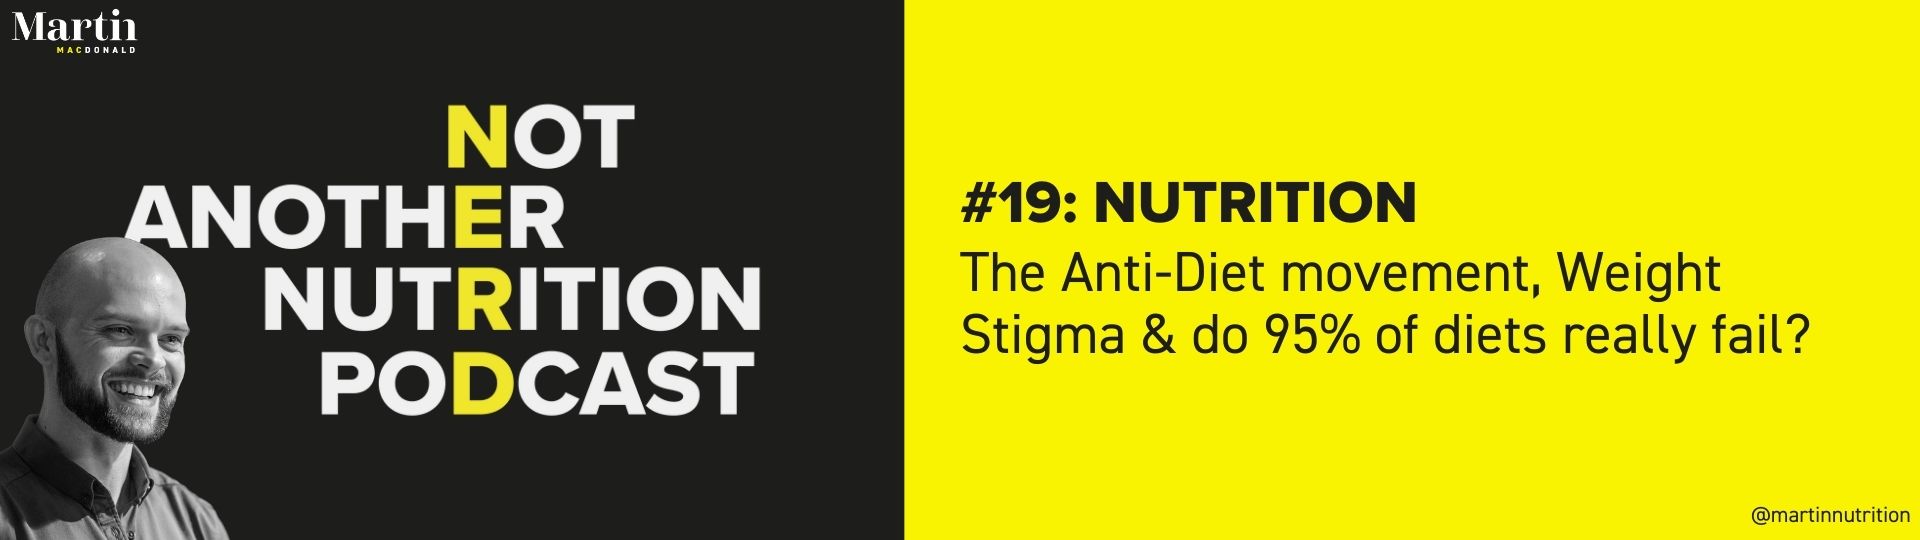 The Anti-Diet movement, Weight Stigma & do 95% of diets really fail?